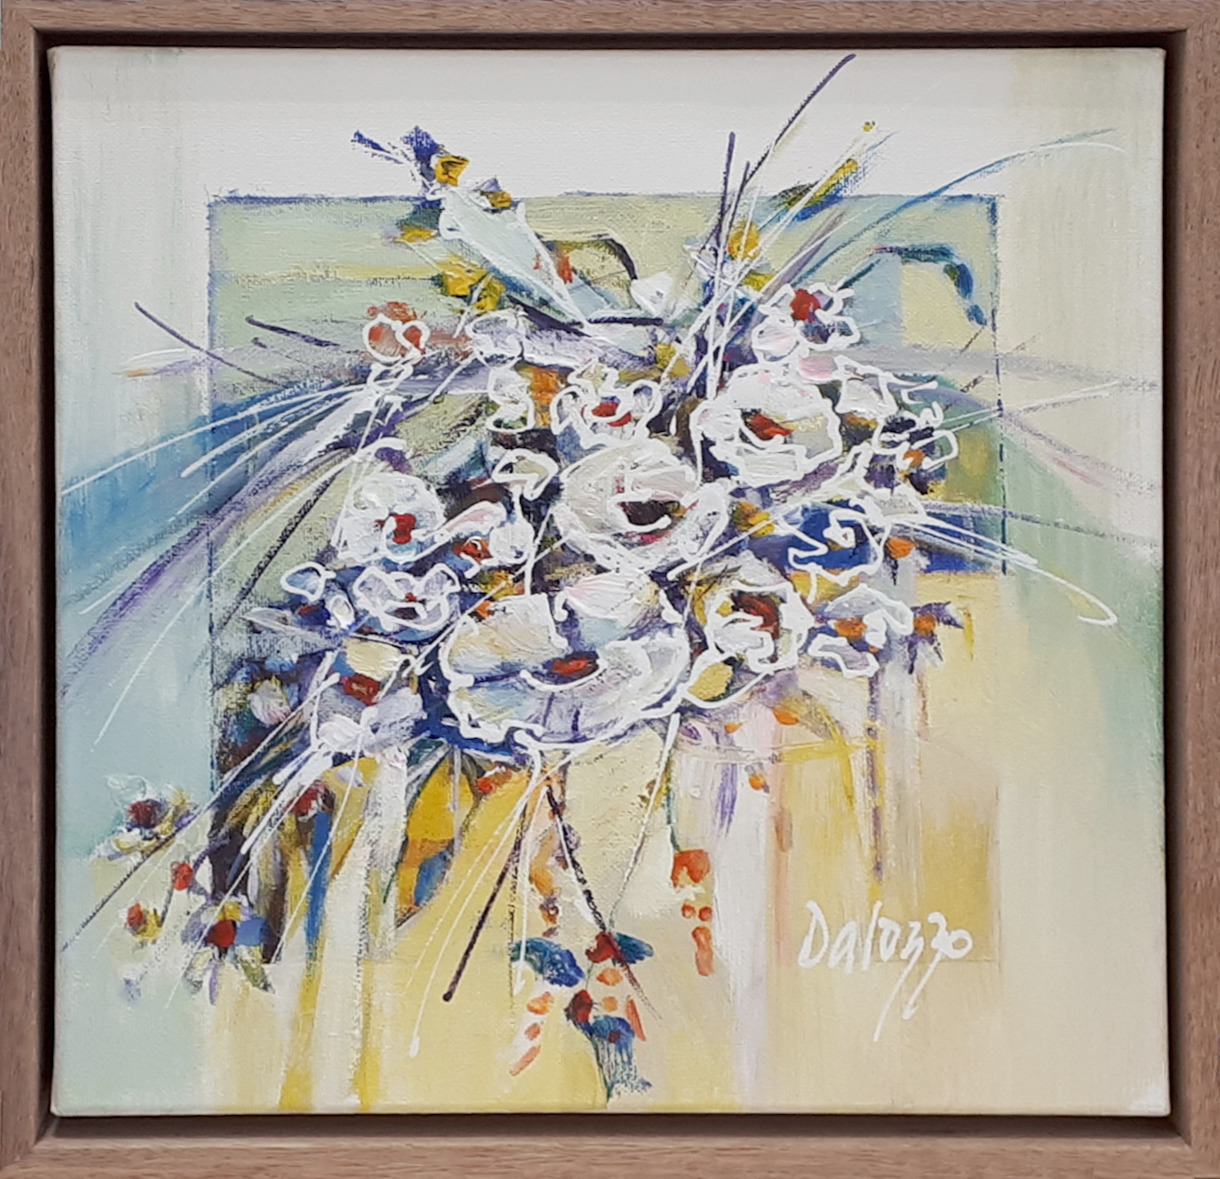 Framed Front View Of Still Life Painting "Floral Study 3" By Lucette Dalozzo